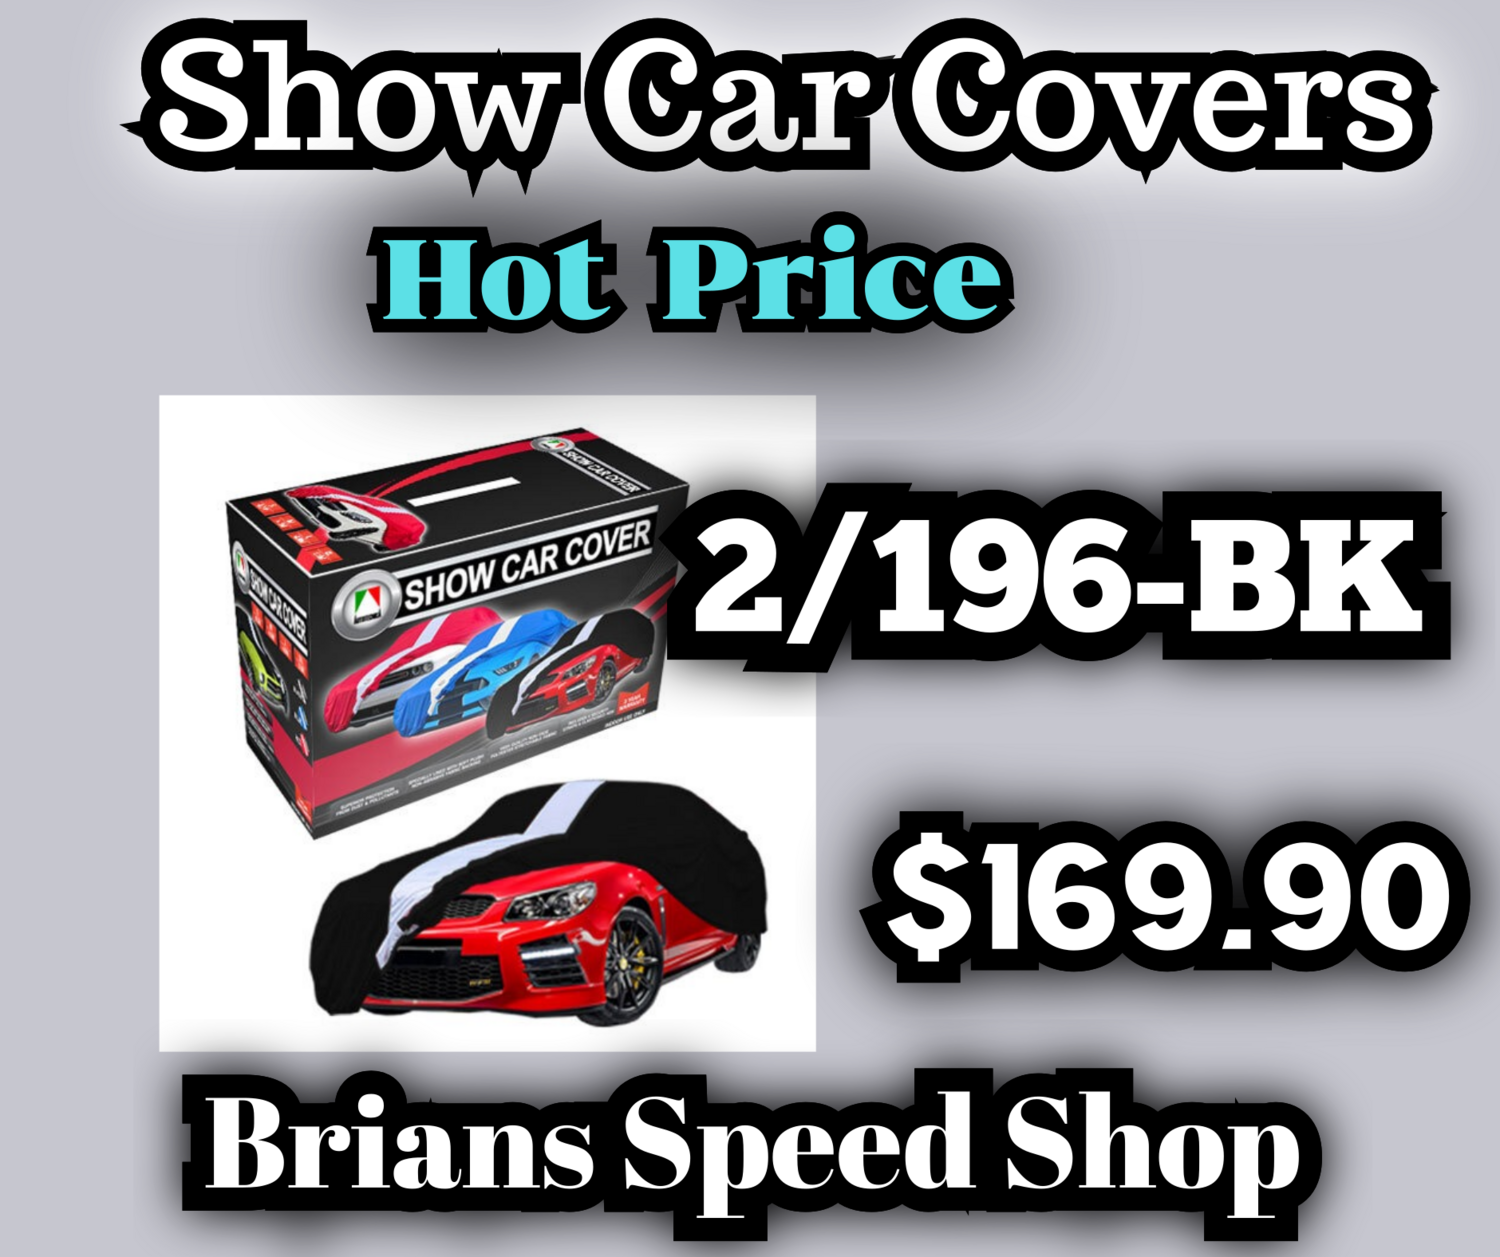 2/196BK The Ultimate Protection Show Car Cover for indoor It has superior protection from dust and pollutants and is constructed with the most high quality non fad polyester stretchable fabric.$169.90